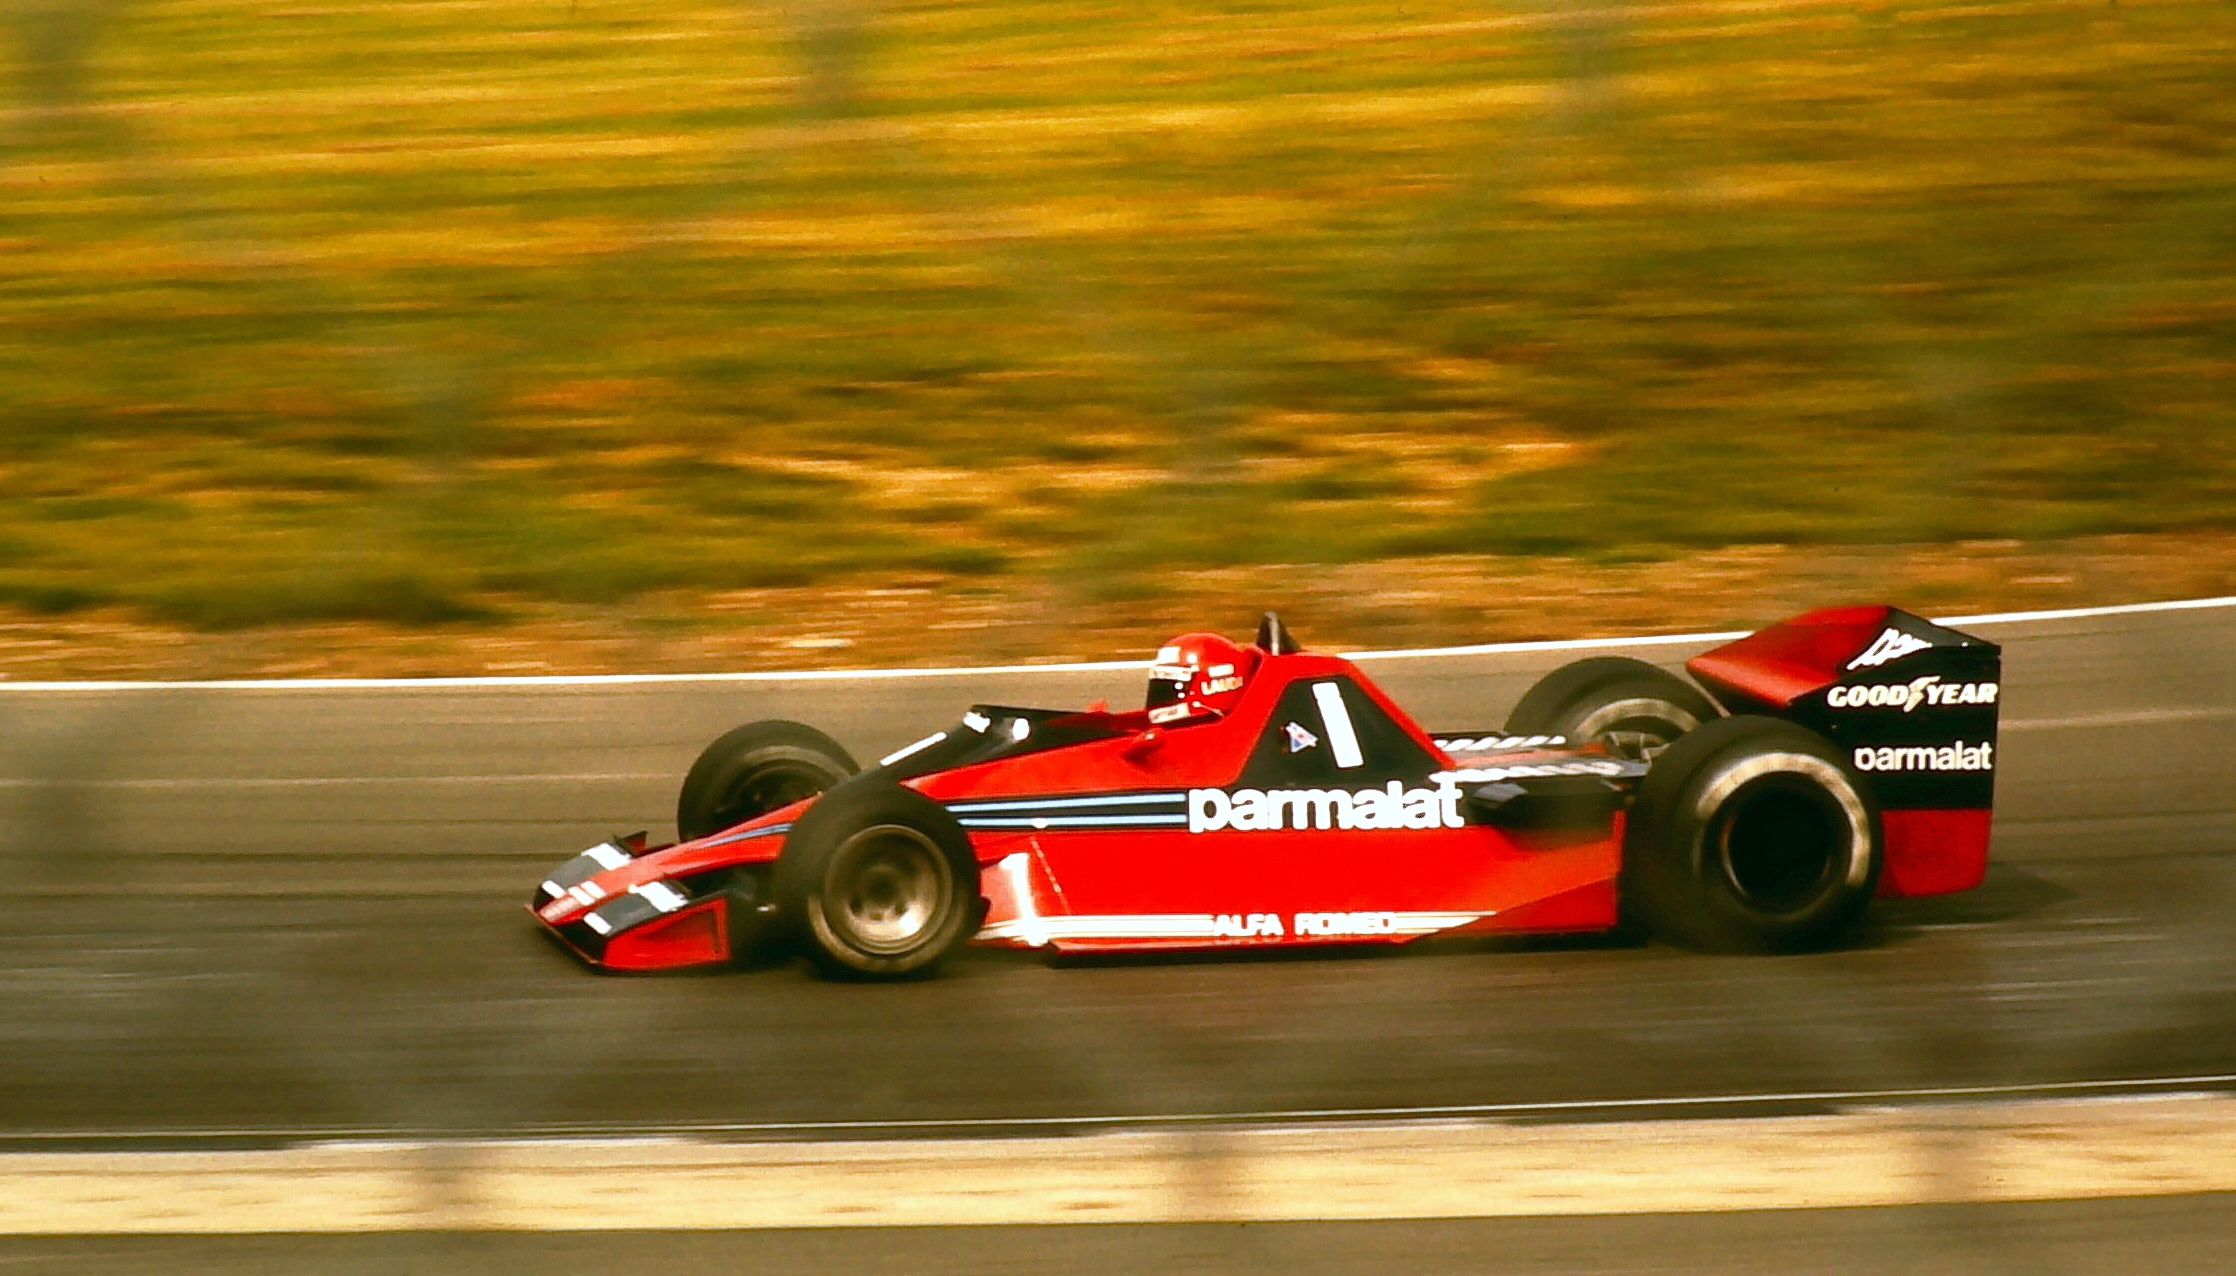 Brabham/Alfa Romeo BT46B won it's one and only Grand Prix with Niki Lauda  in Sweden(1978)